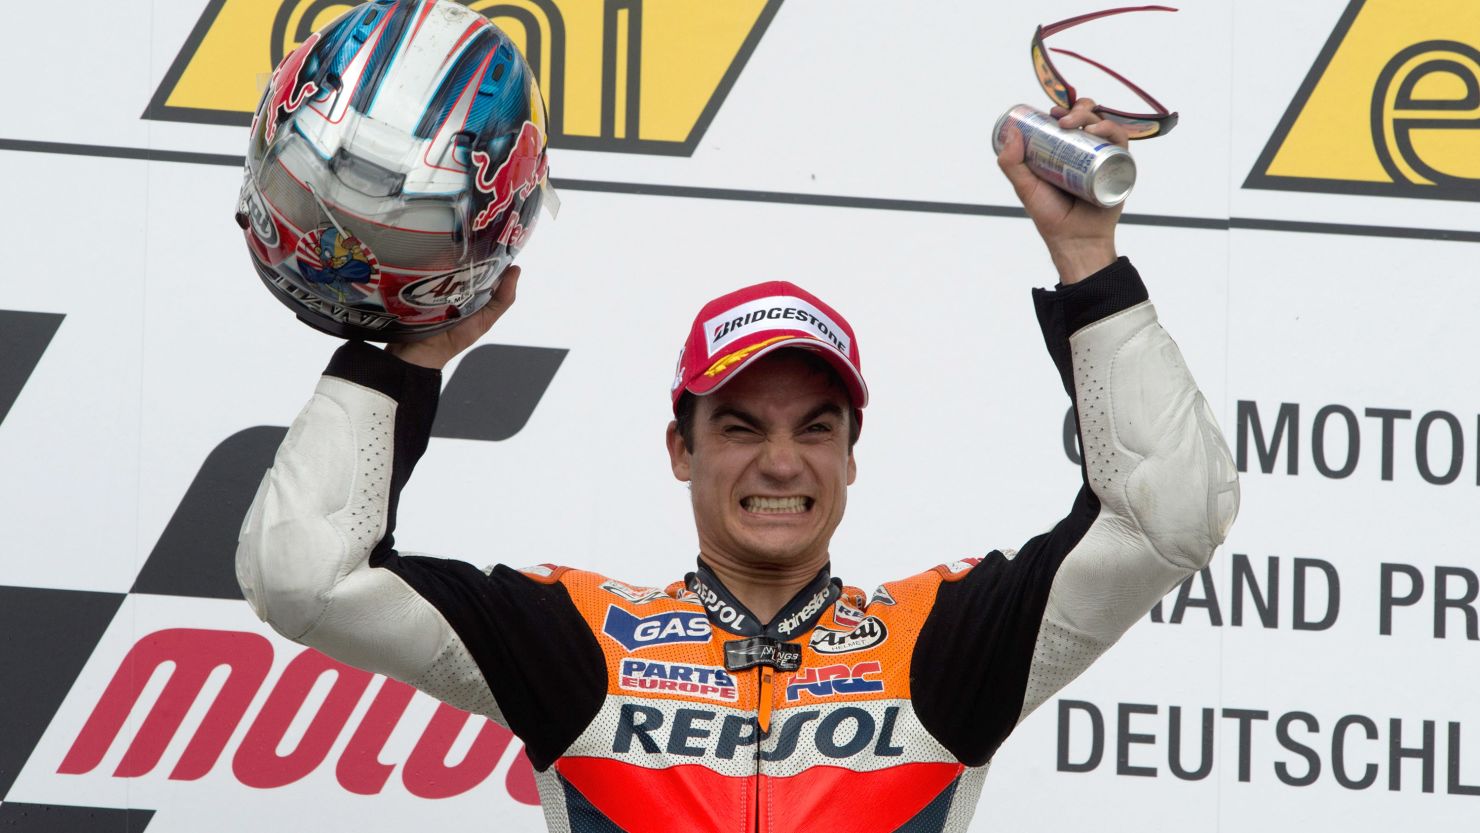 Dani Pedrosa celebrates after winning his first MotoGP of the 2012 season at the Sachsenring in Germany